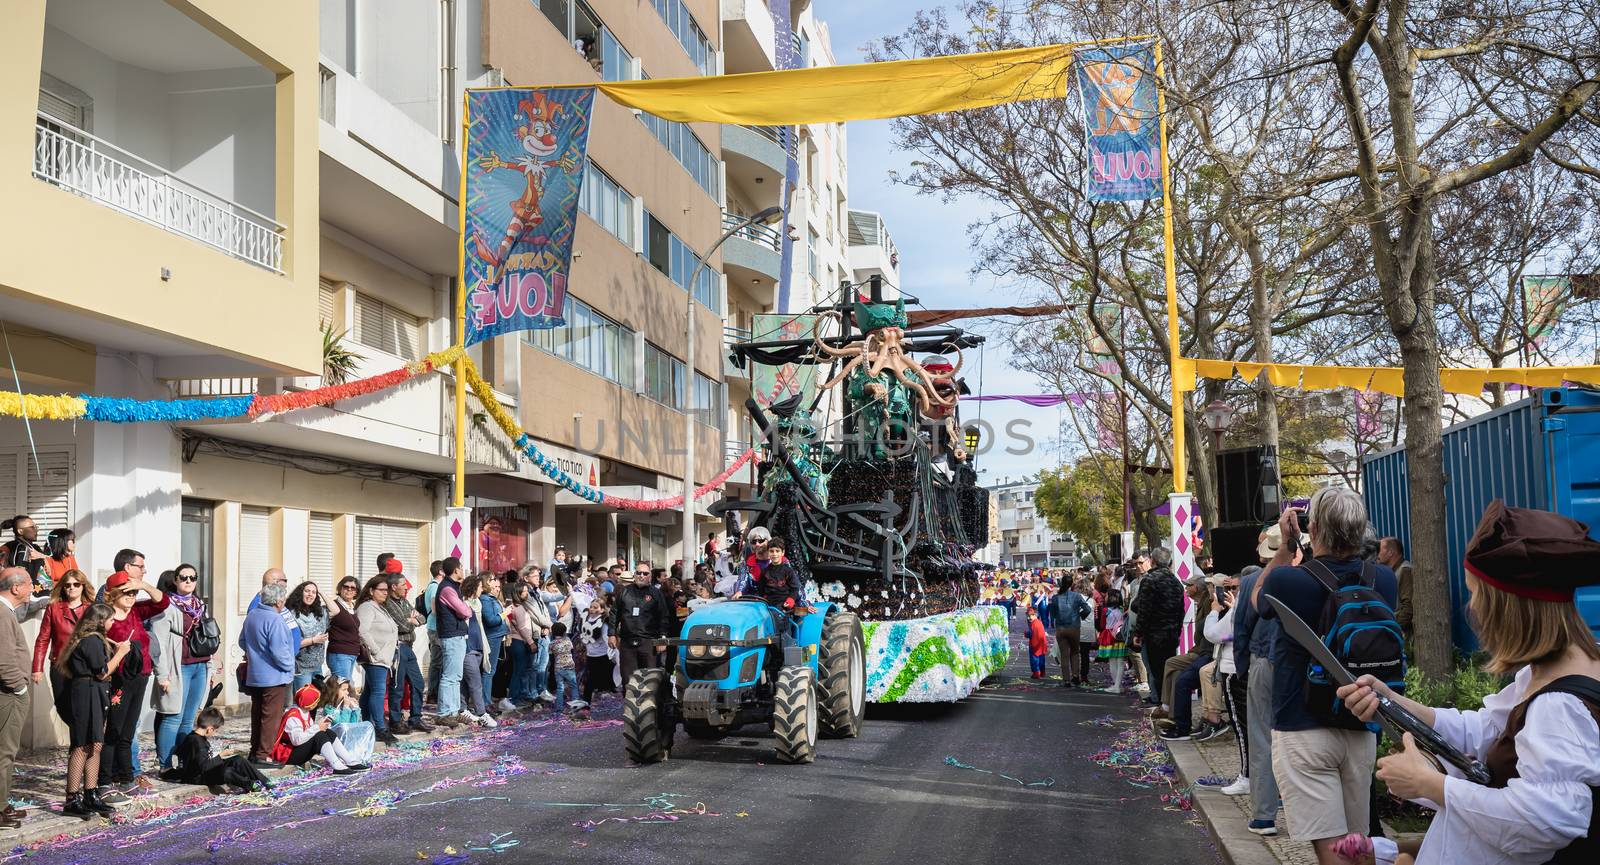 Pirate shipe loat parading in the street in carnival of Loule ci by AtlanticEUROSTOXX